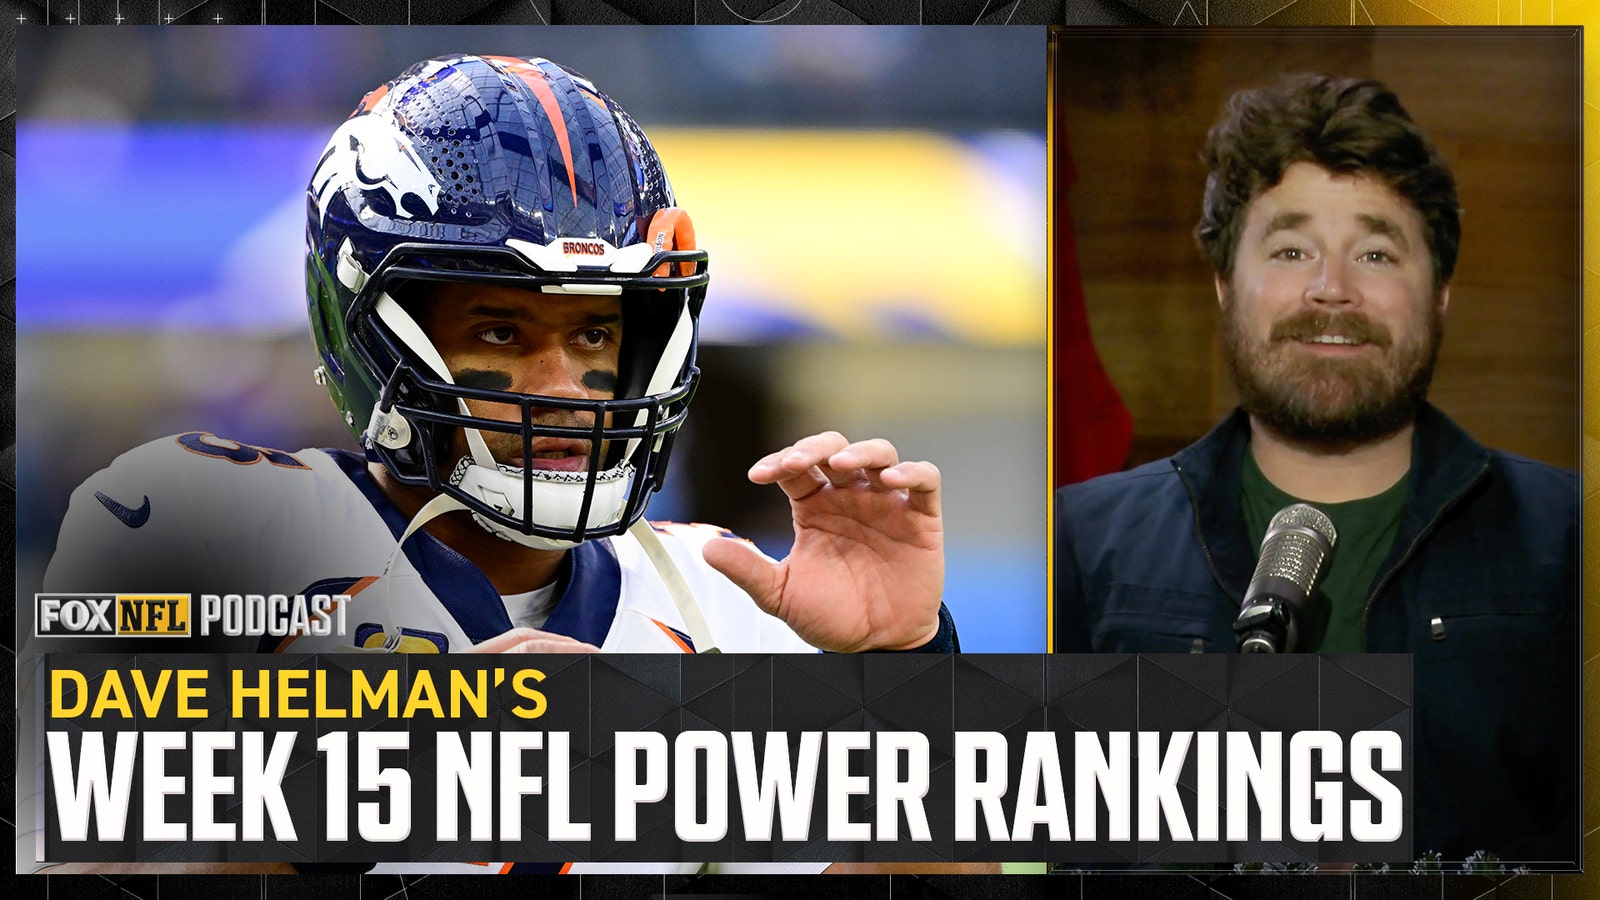 NFL Rankings: Who's challenging the Niners for the top spot?